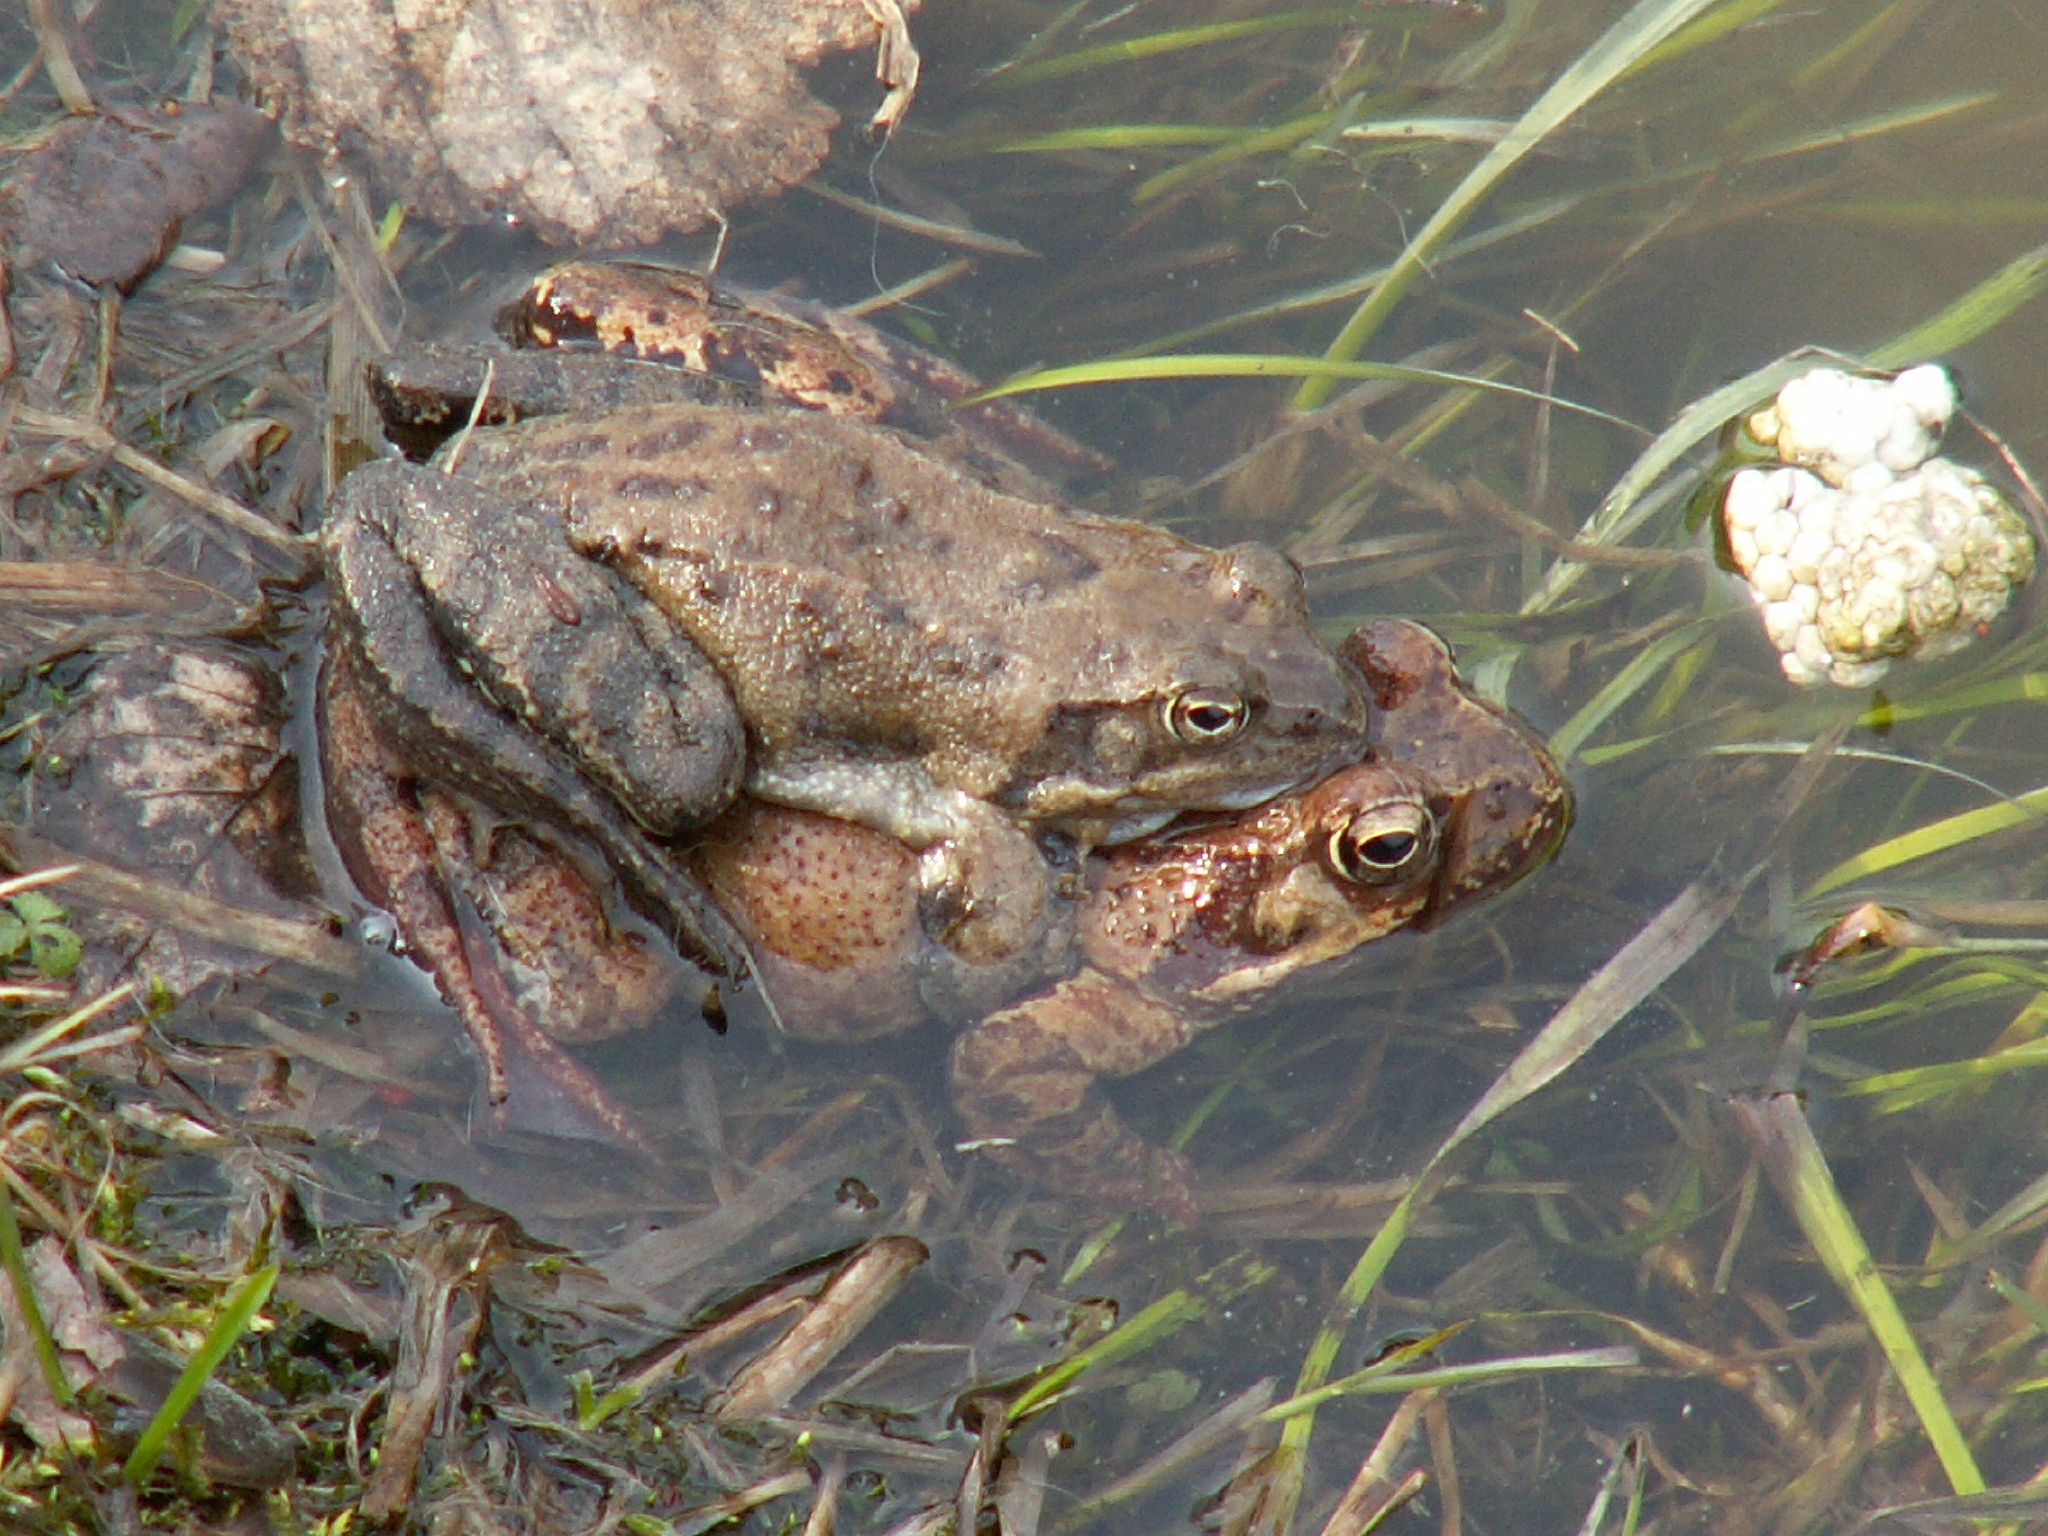 an image of a frog that is in the water